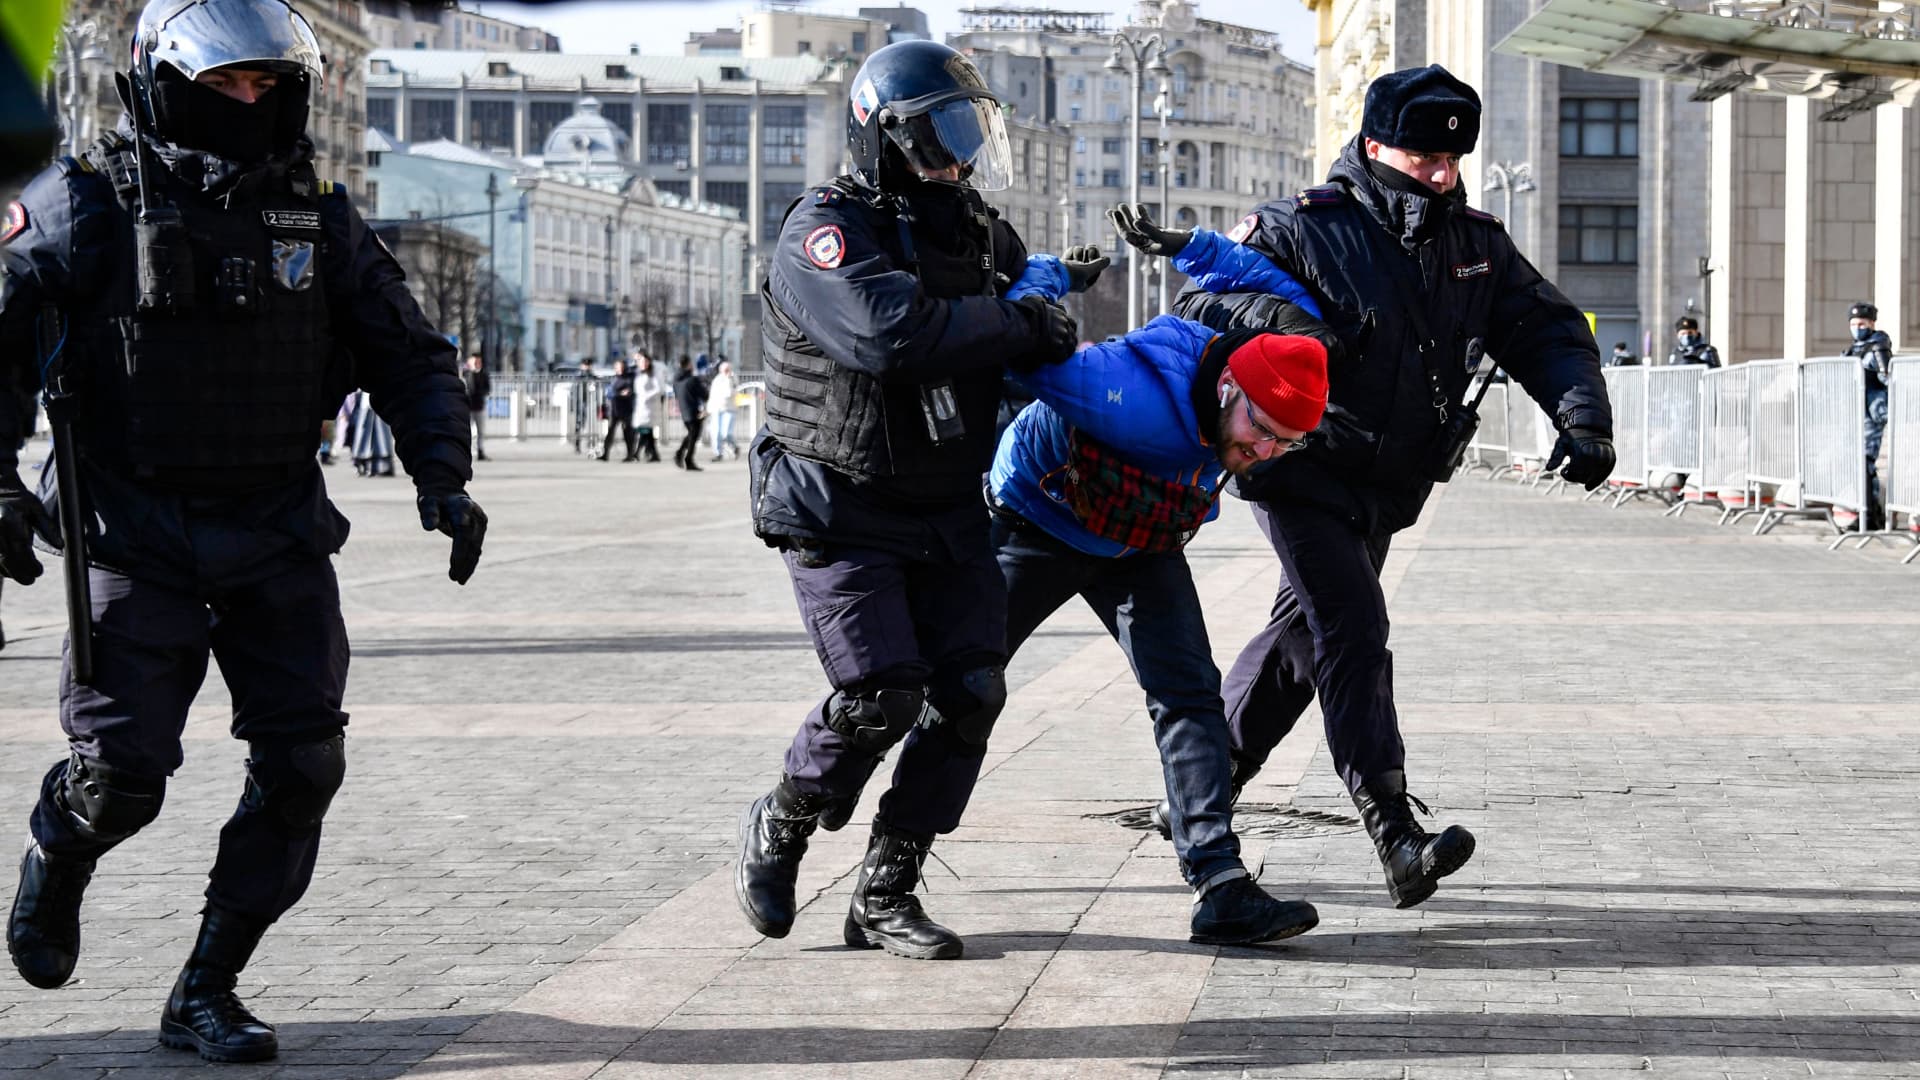 Police officers detain a man during a protest against Russian military action in Ukraine, in Manezhnaya Square in central Moscow on March 13, 2022.